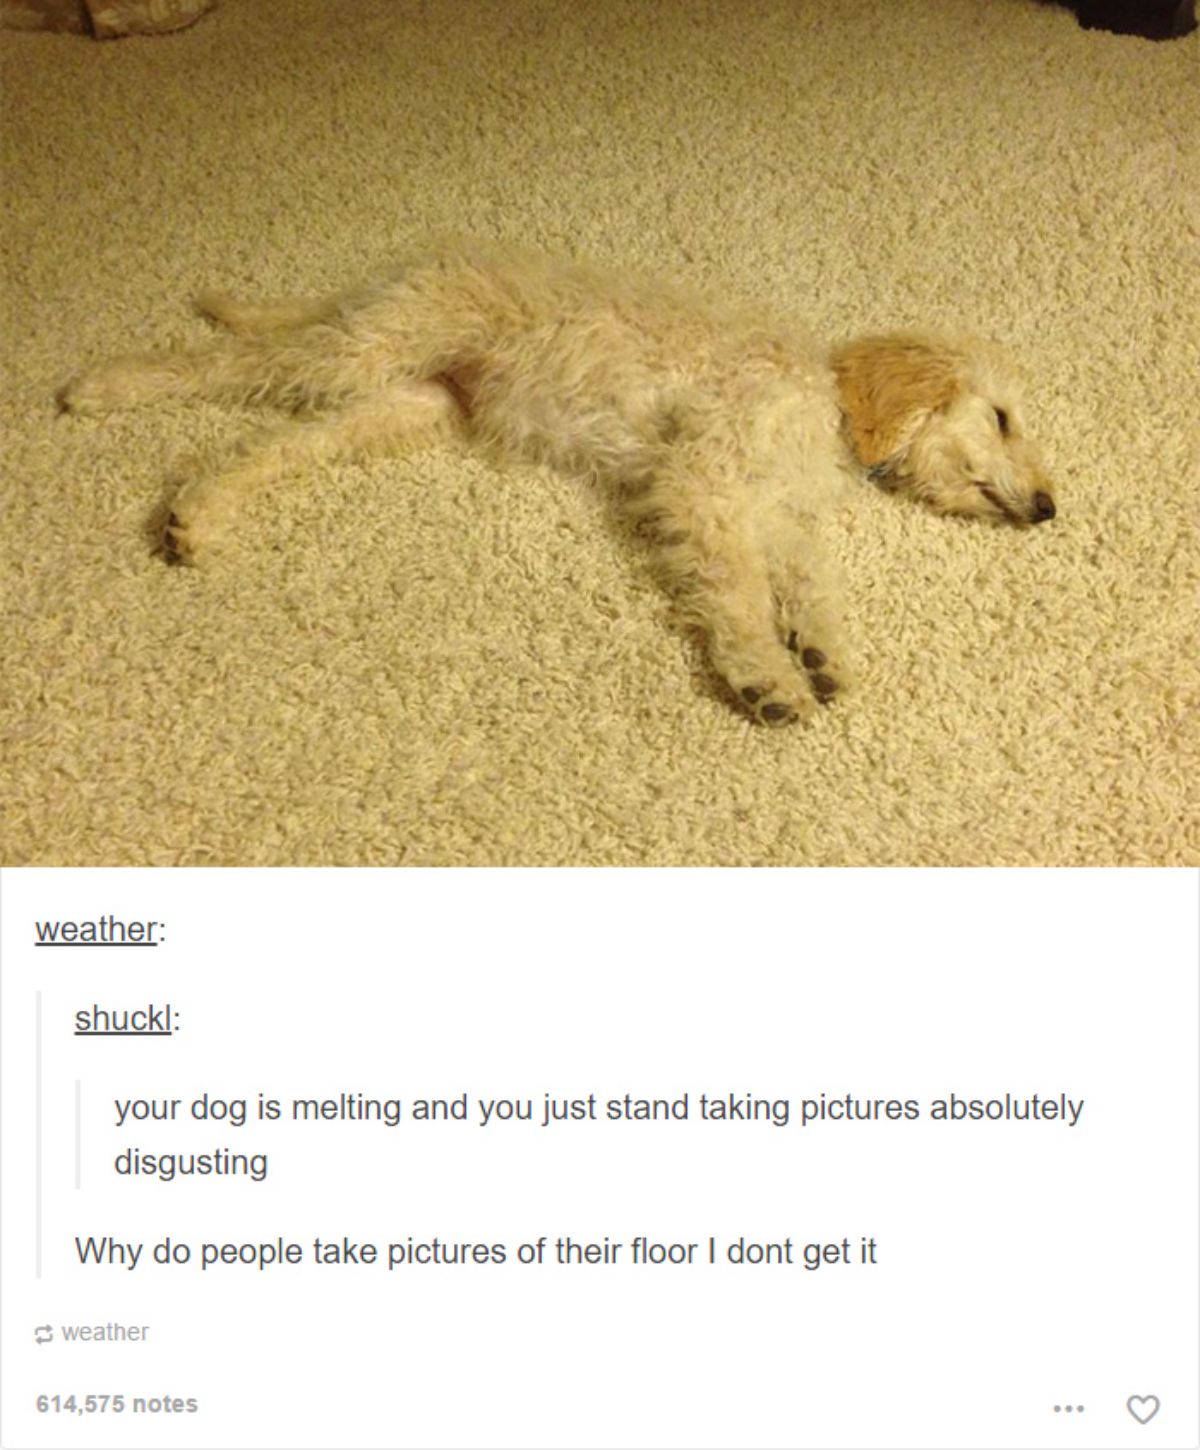 tumblr post white poodle on a white carpet and the caption says the dog is melting and another asks why people take pictures of their floor